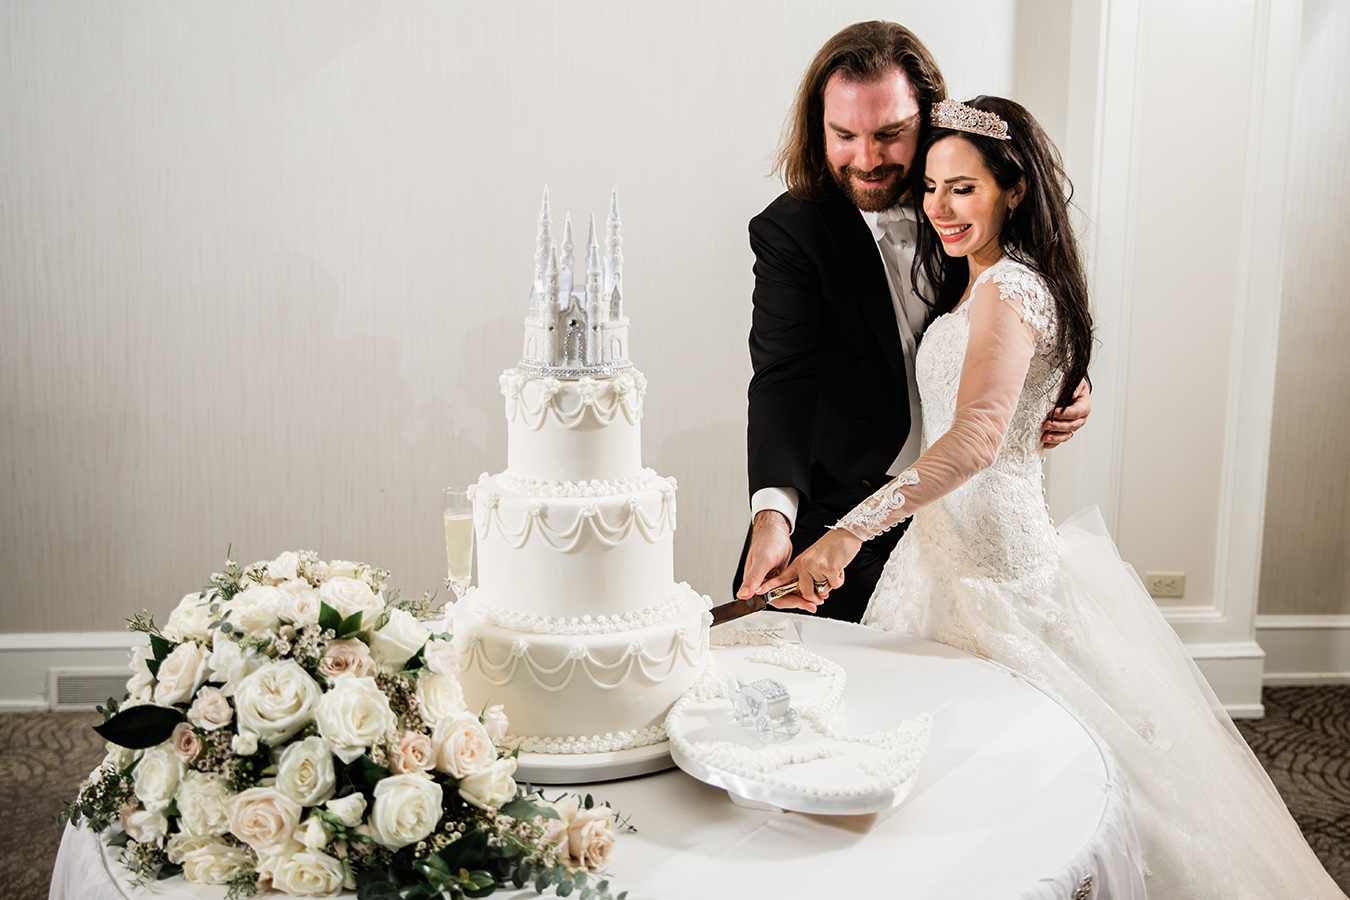 Jess’ 3-tier wedding cake was fit for a princess - complete with a castle and royal carriage! - and featured decadent flavor profiles, including white velvet and apricot champagne and Italian cream and pistachio.